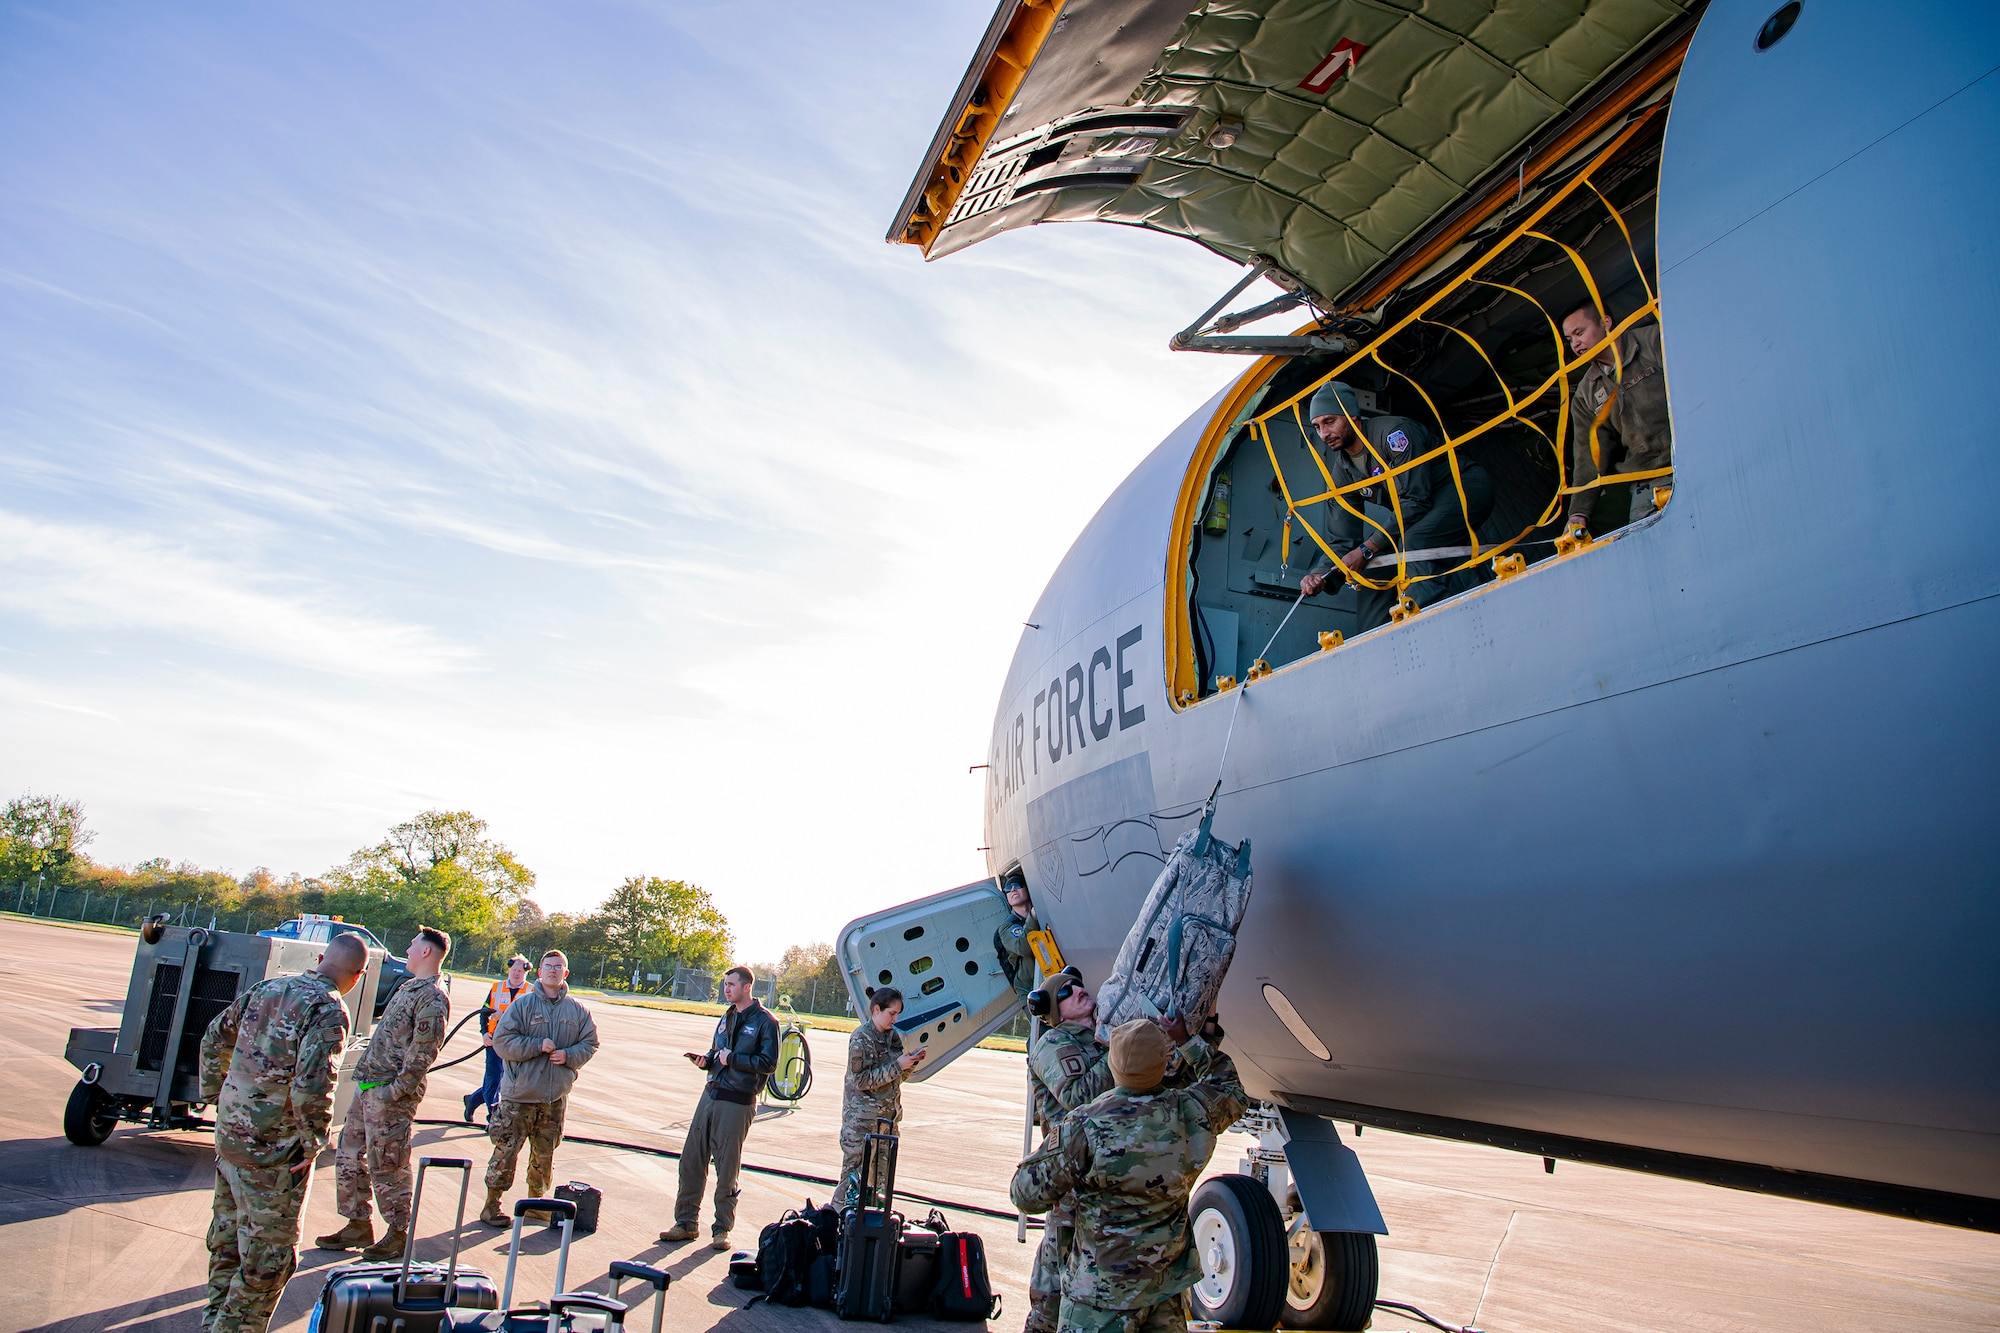 Airmen from the 100th Aircraft Maintenance Squadron and 351st Air Refueling Squadron unload cargo from a KC-135 Stratotanker at RAF Fairford, England, Nov. 1, 2021. Airmen from the 100th Air Refueling Wing conducted operations out of RAFF as part of an Agile Combat Employment exercise. Utilizing ACE concepts ensures that U.S. forces in Europe are better equipped to operate from locations with varying levels of capacity and support to accomplish the mission. (U.S. Air Force photo by Senior Airman Eugene Oliver)